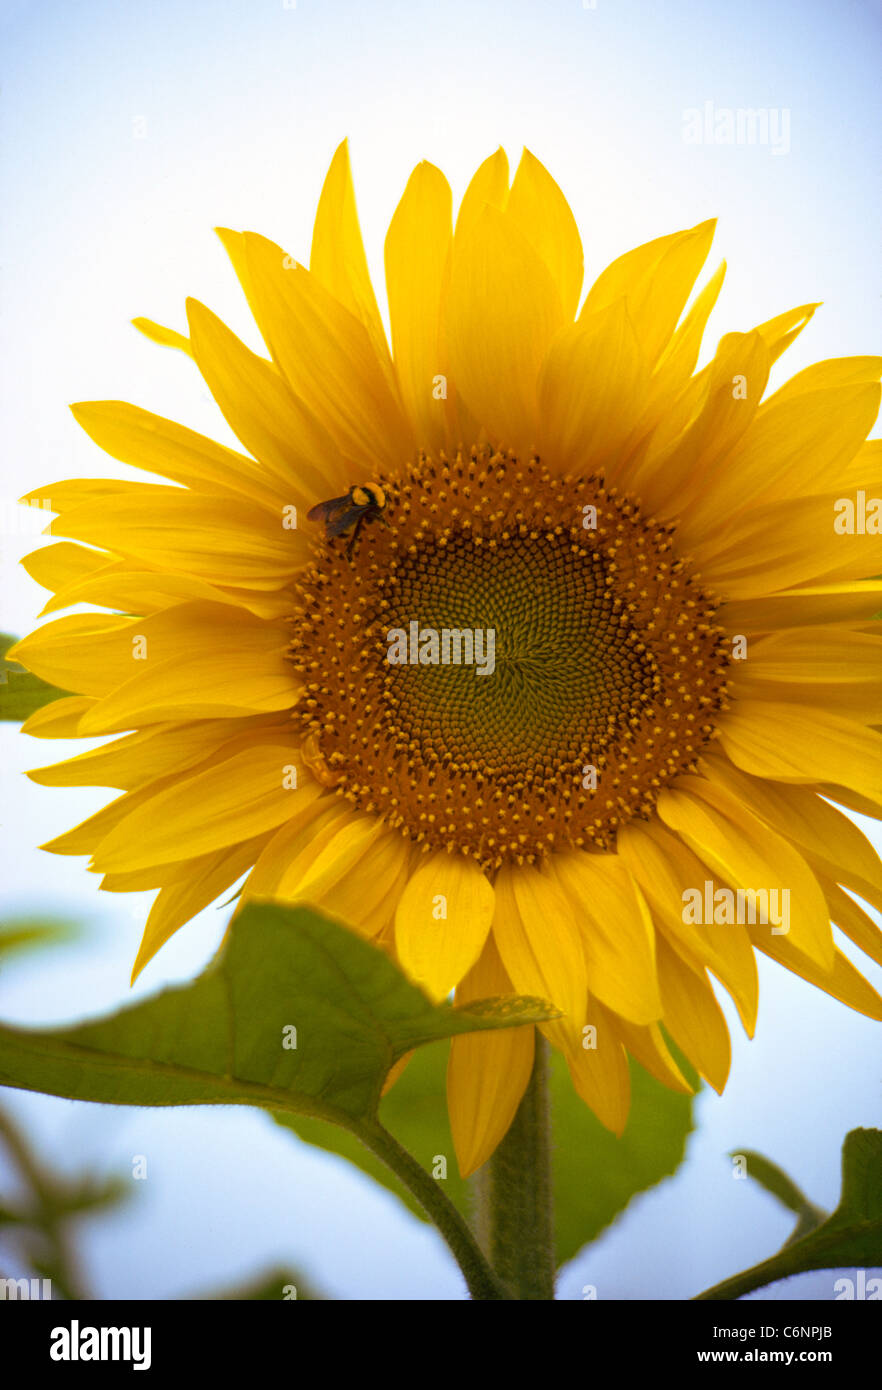 A bumblebee enjoys nectar from the small flowers that make up the distinctive look of the Sunflower, a pretty and popular ornamental and food plant. Stock Photo